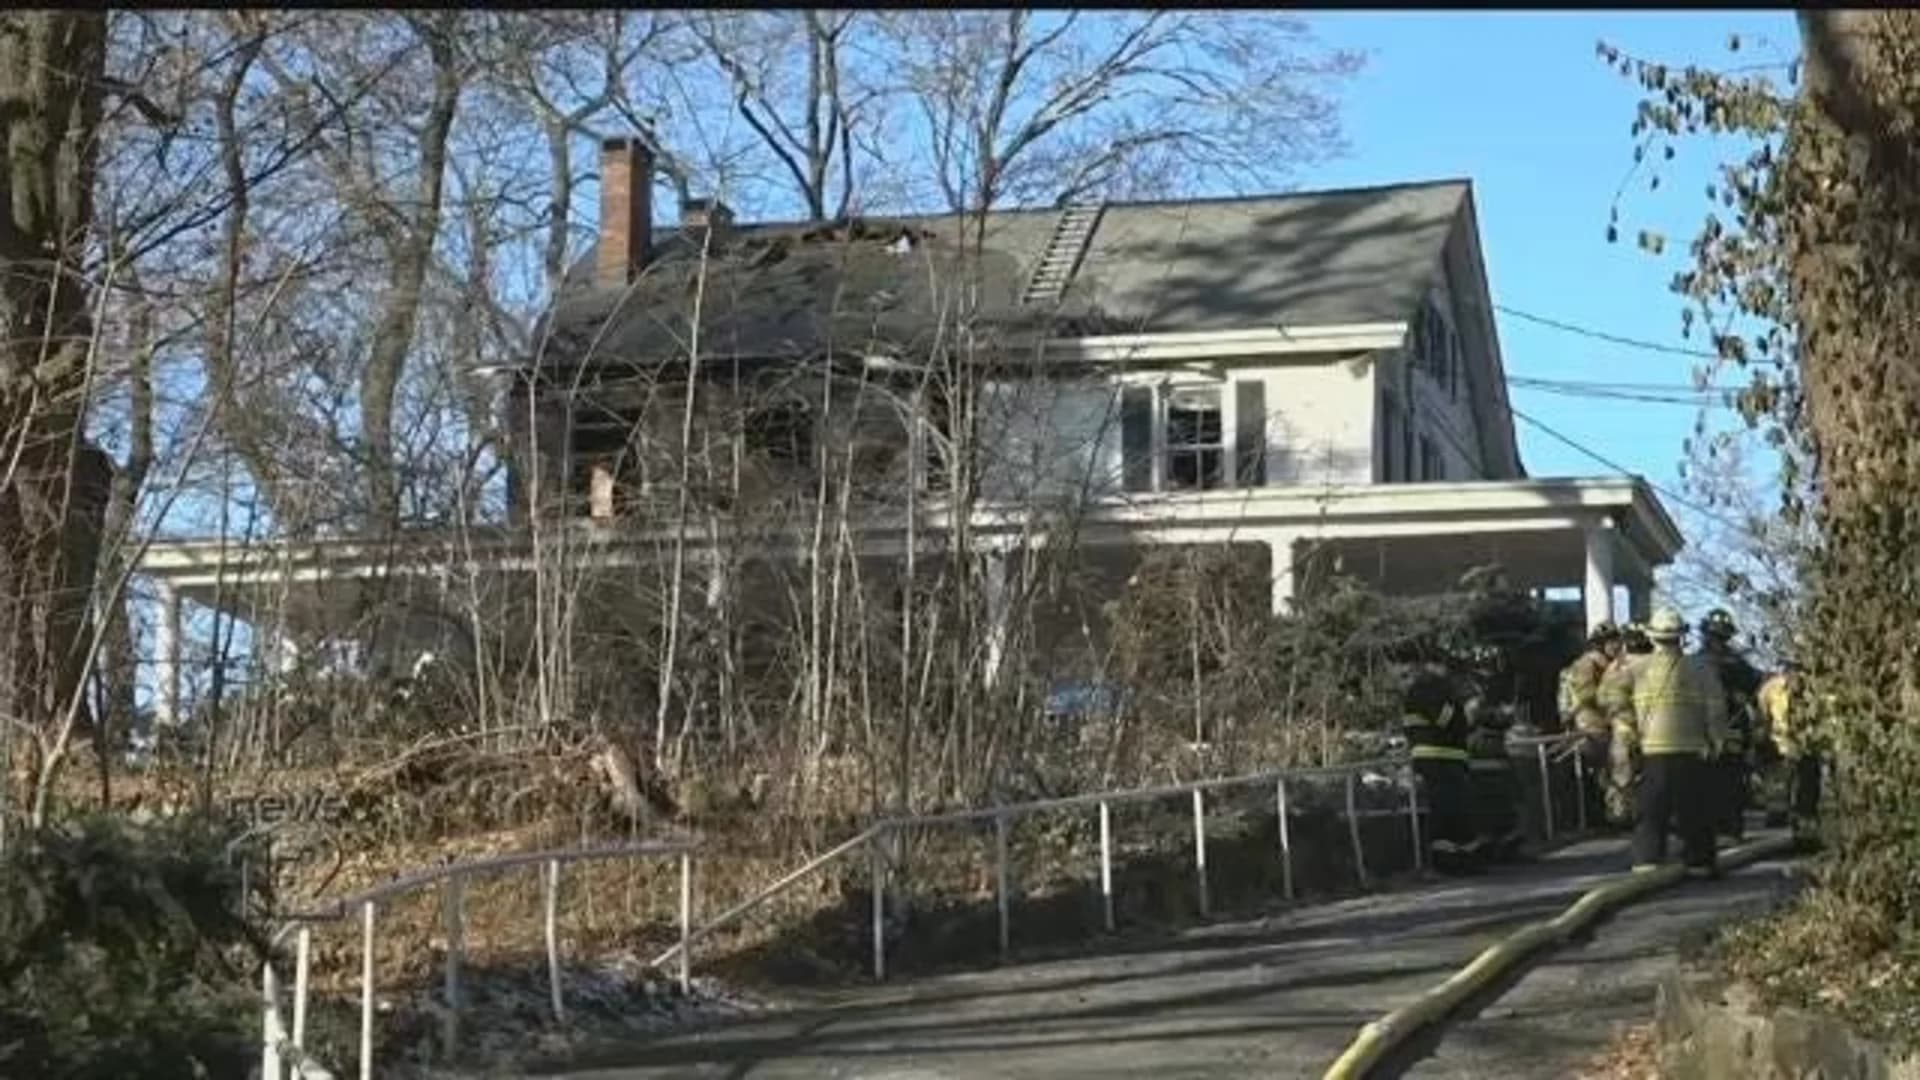 7 displaced after massive fire rips through Thornwood group home